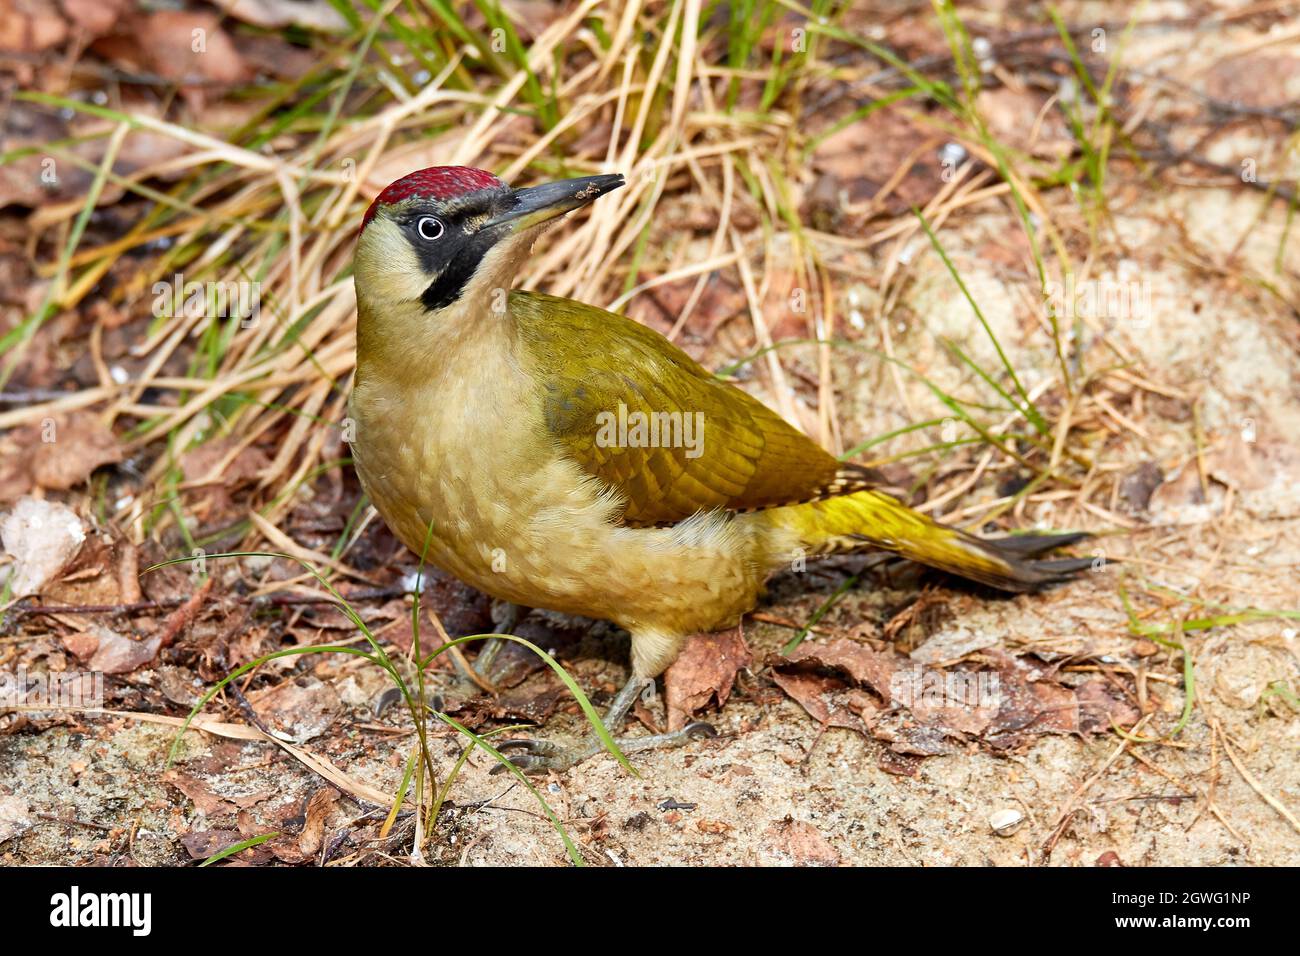 Green Woodpecker Sits On Forest Floor Looking For Food Typical For The Species Stock Photo